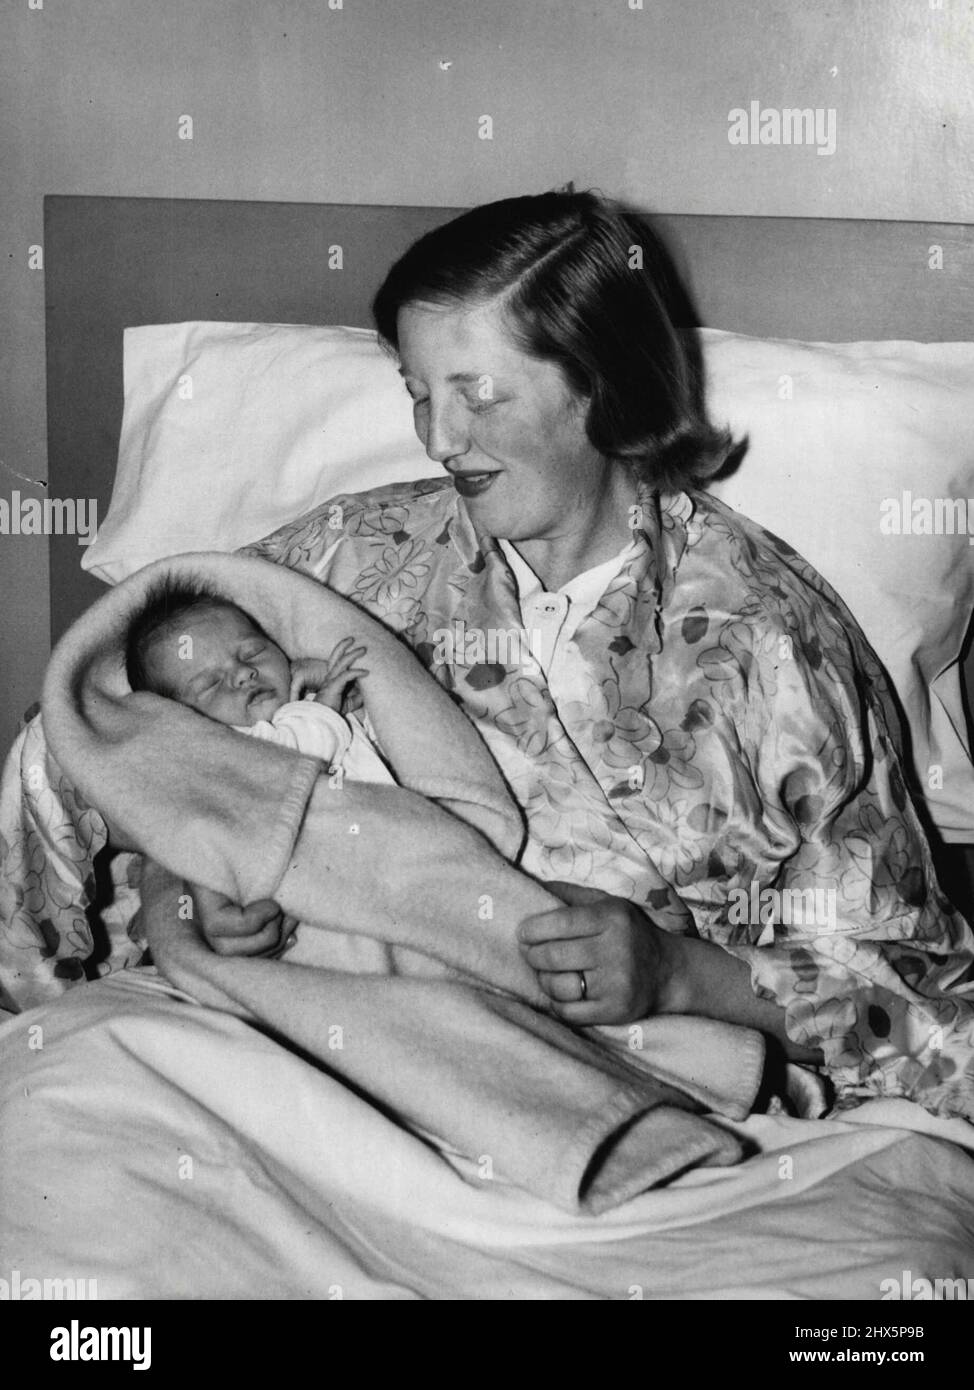 Daughter For Well Known Soprano -- A new and unpublished picture just taken of Mrs. Probyn (Marjorie Shires) with her infant daughter in the nursing home. The birth of a daughter - Linda Judith, was recently announced to Miss Marjorie Shires. One of the principal Sopranos of the sadlers wells opera. She is the wife of Mr. John Probyn, the Australian Baritone, in the company. Miss Shires, who was born in Cheshire, is the daughter of the late Mr. H. Shires and of Mrs. H. Shires of Woodland Avenue, Crewe, Cheshire and her husband Mr. John Probyn is the son of Mr. R. Lee of Sydney, Australia. Stock Photo